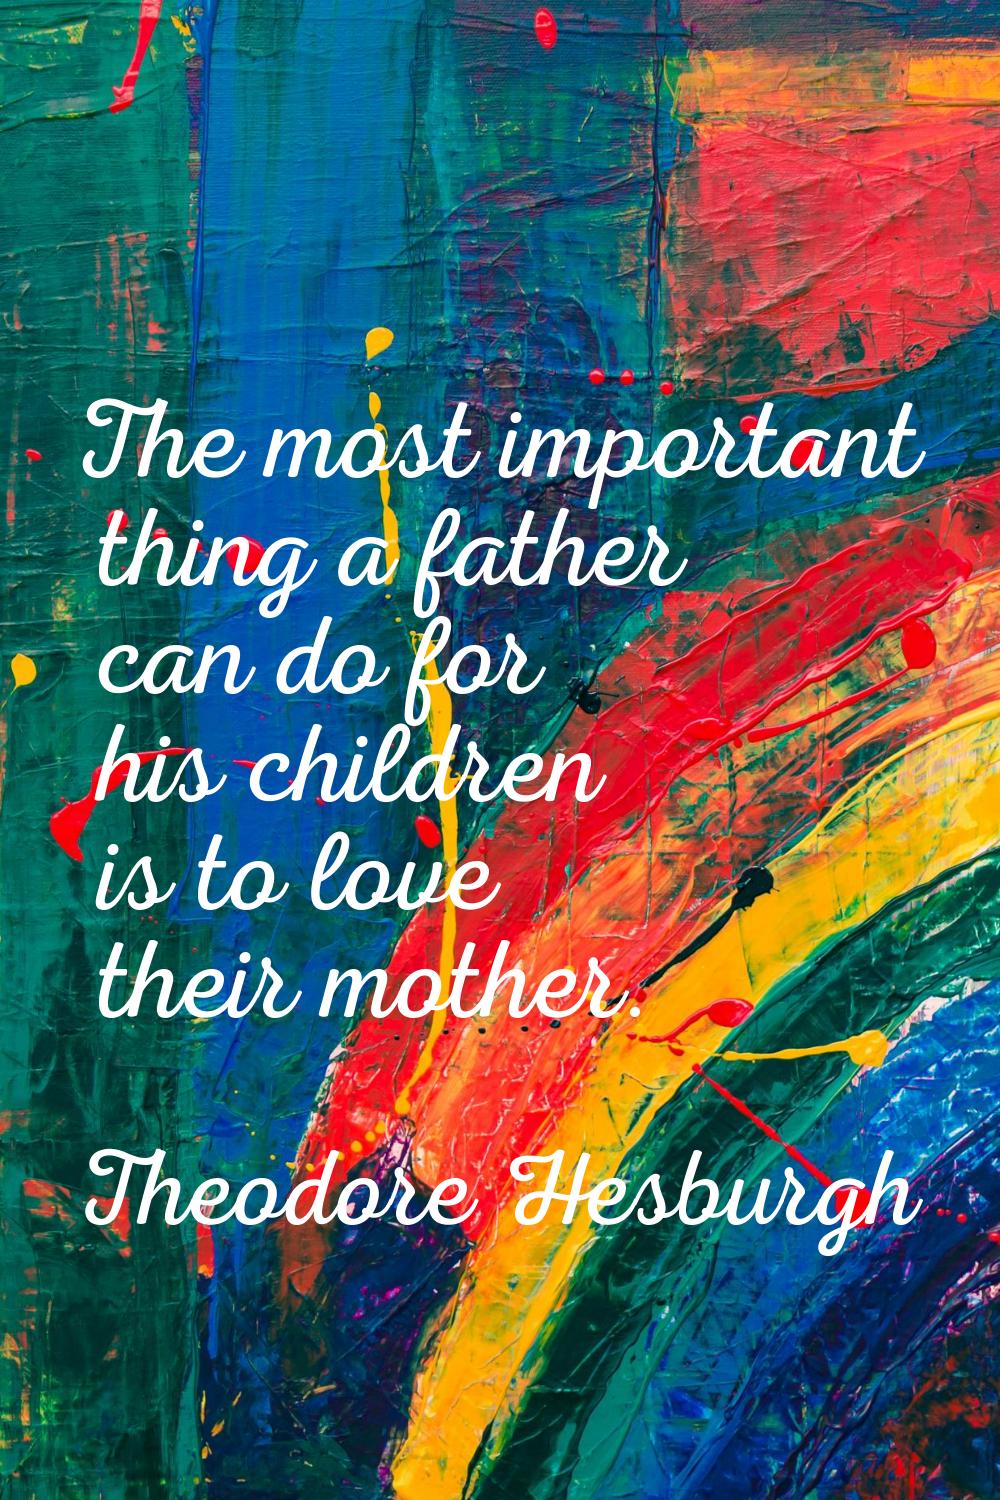 The most important thing a father can do for his children is to love their mother.